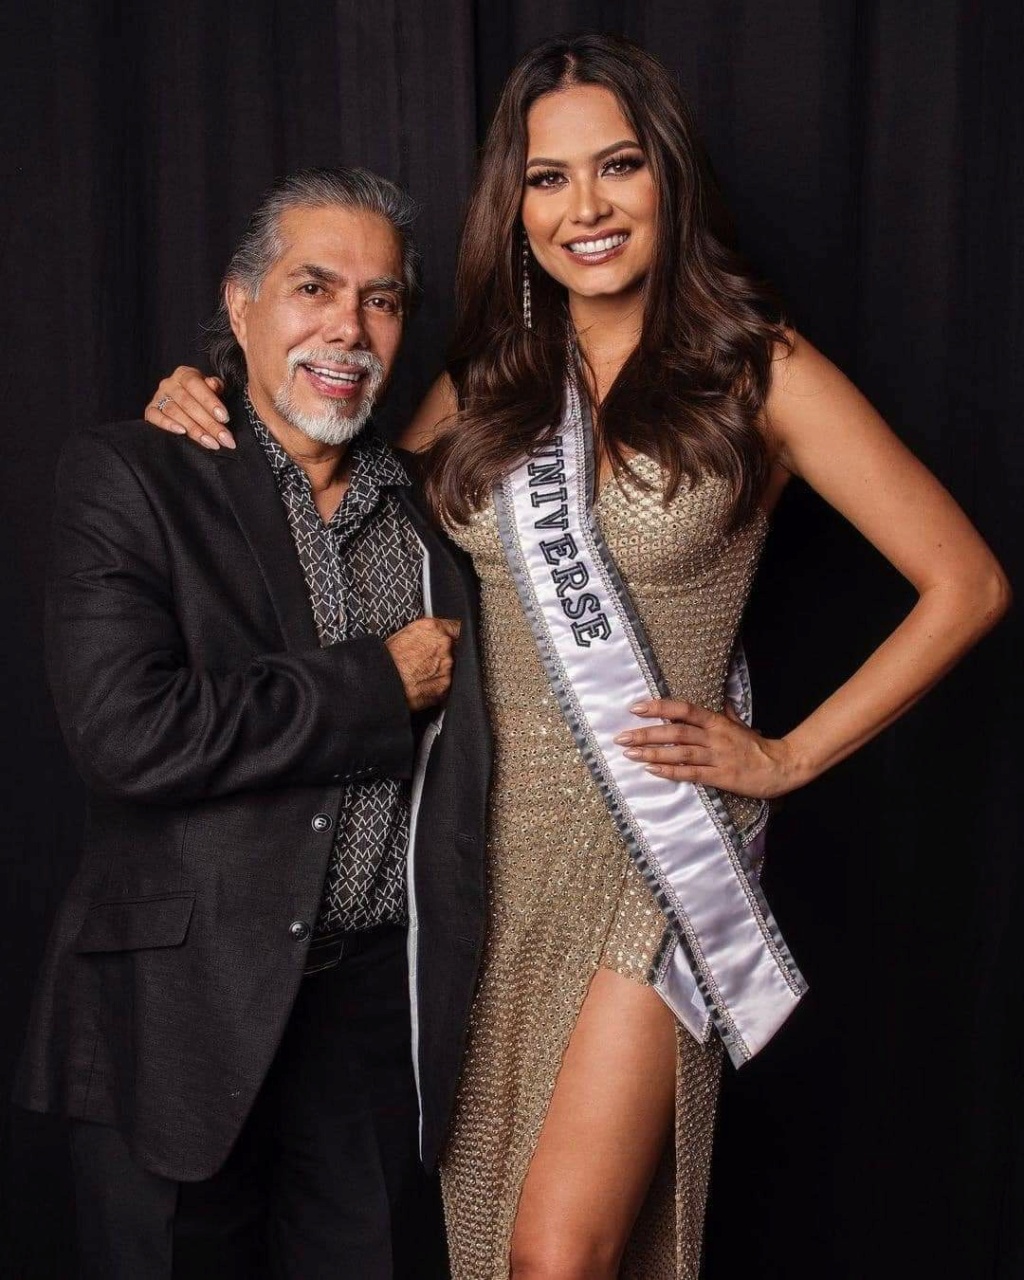 The Official Thread Of Miss Universe 2020 - Andrea Meza of Mexico  - Page 4 Fb_18777